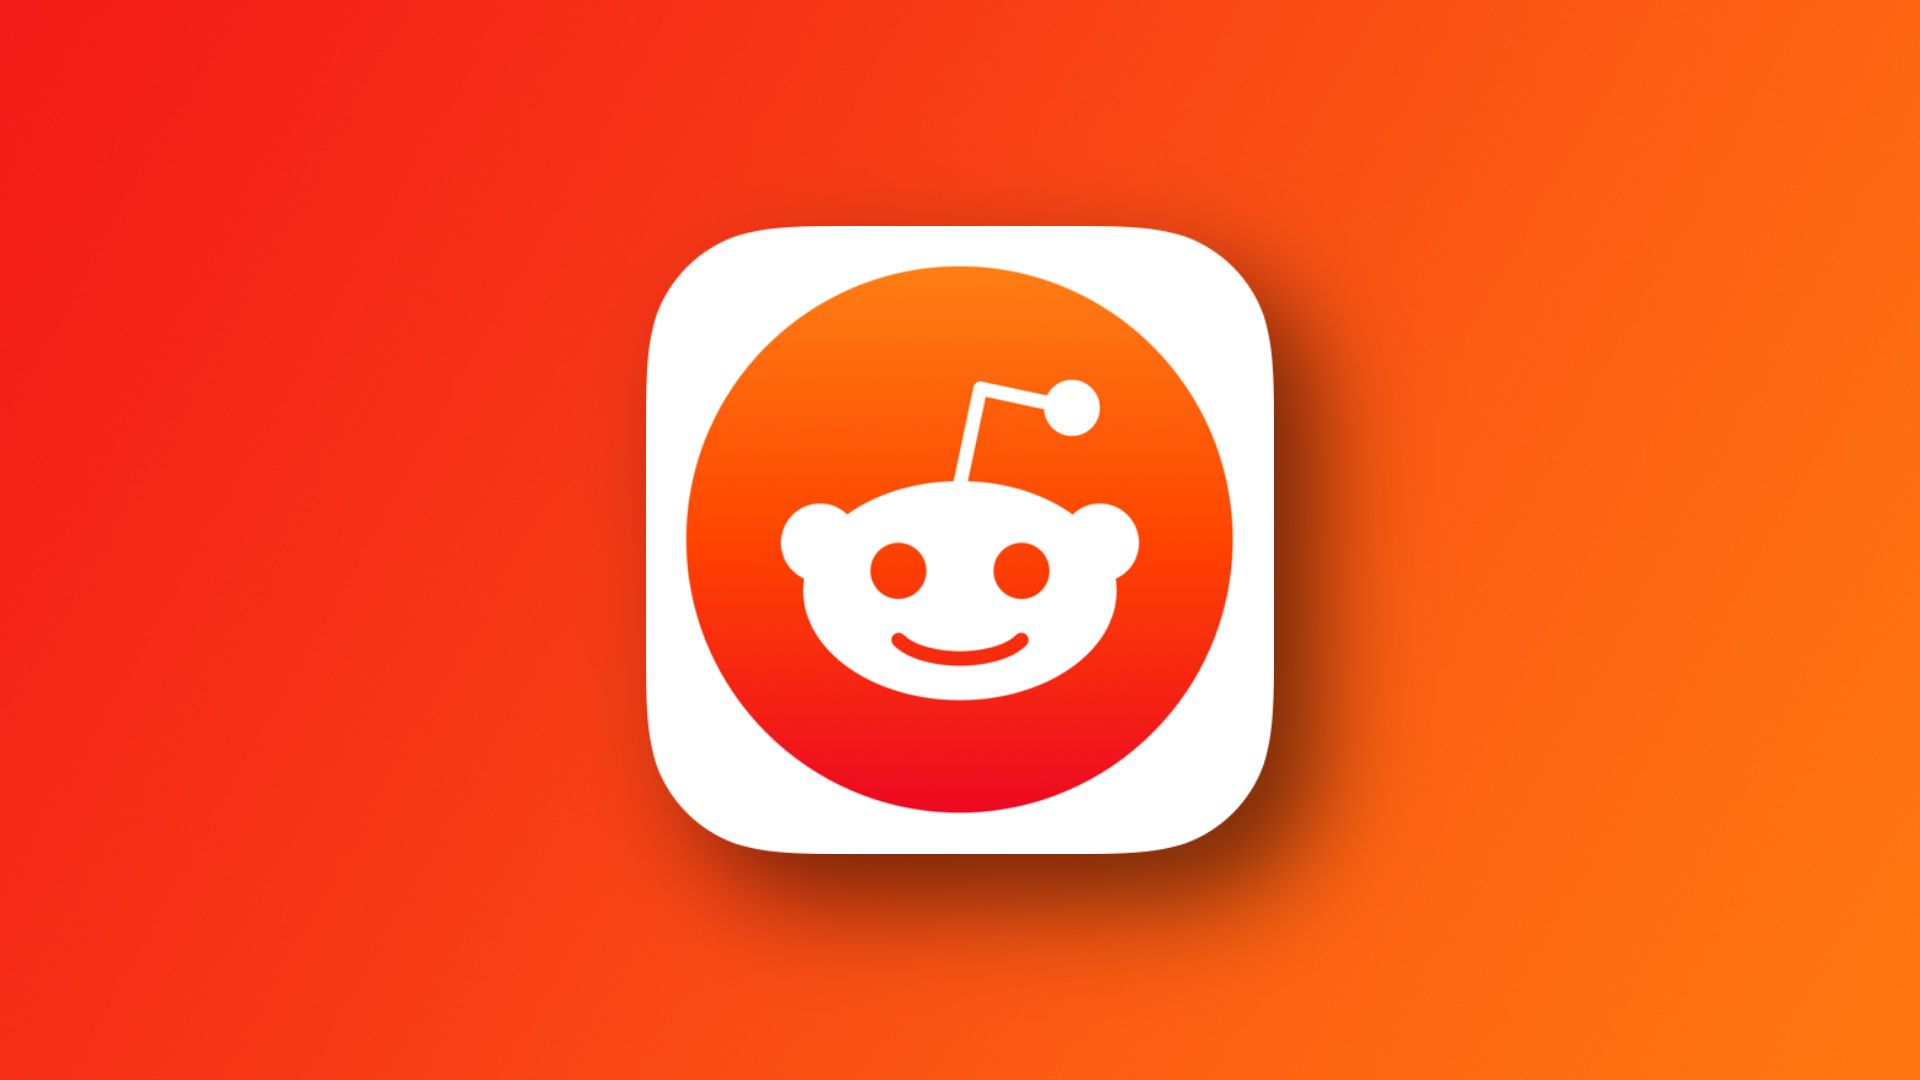 Reddit App Ends Support for iOS 12, Now Requires iPhone 6S or Later to Work